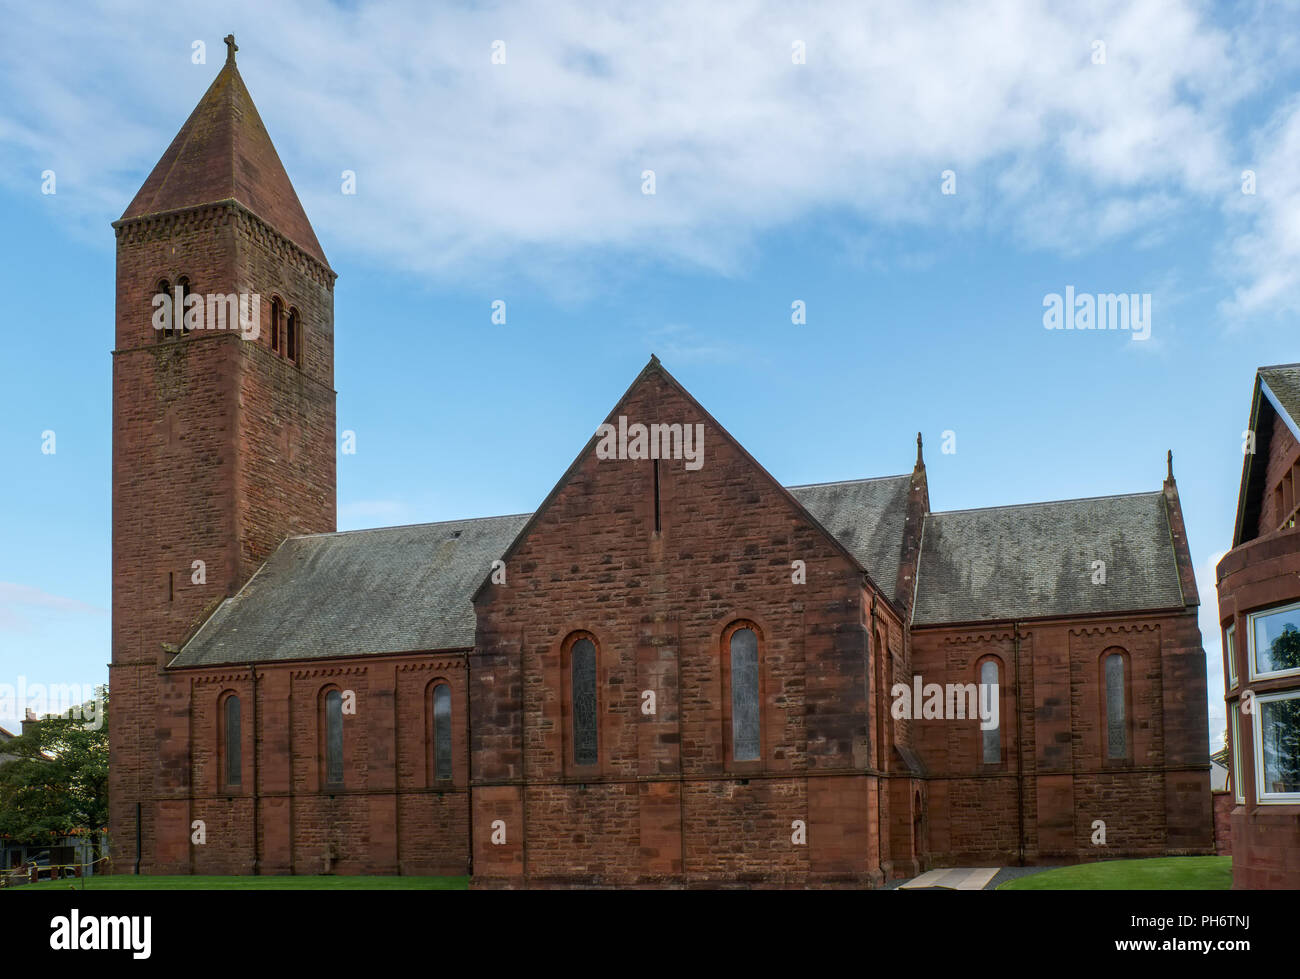 Prestwick, Scotland, UK - August 29, 2018: St Nicholas Parish Church. This is the modern parish church built in 1908 to serve the south of Prestwick,  Stock Photo